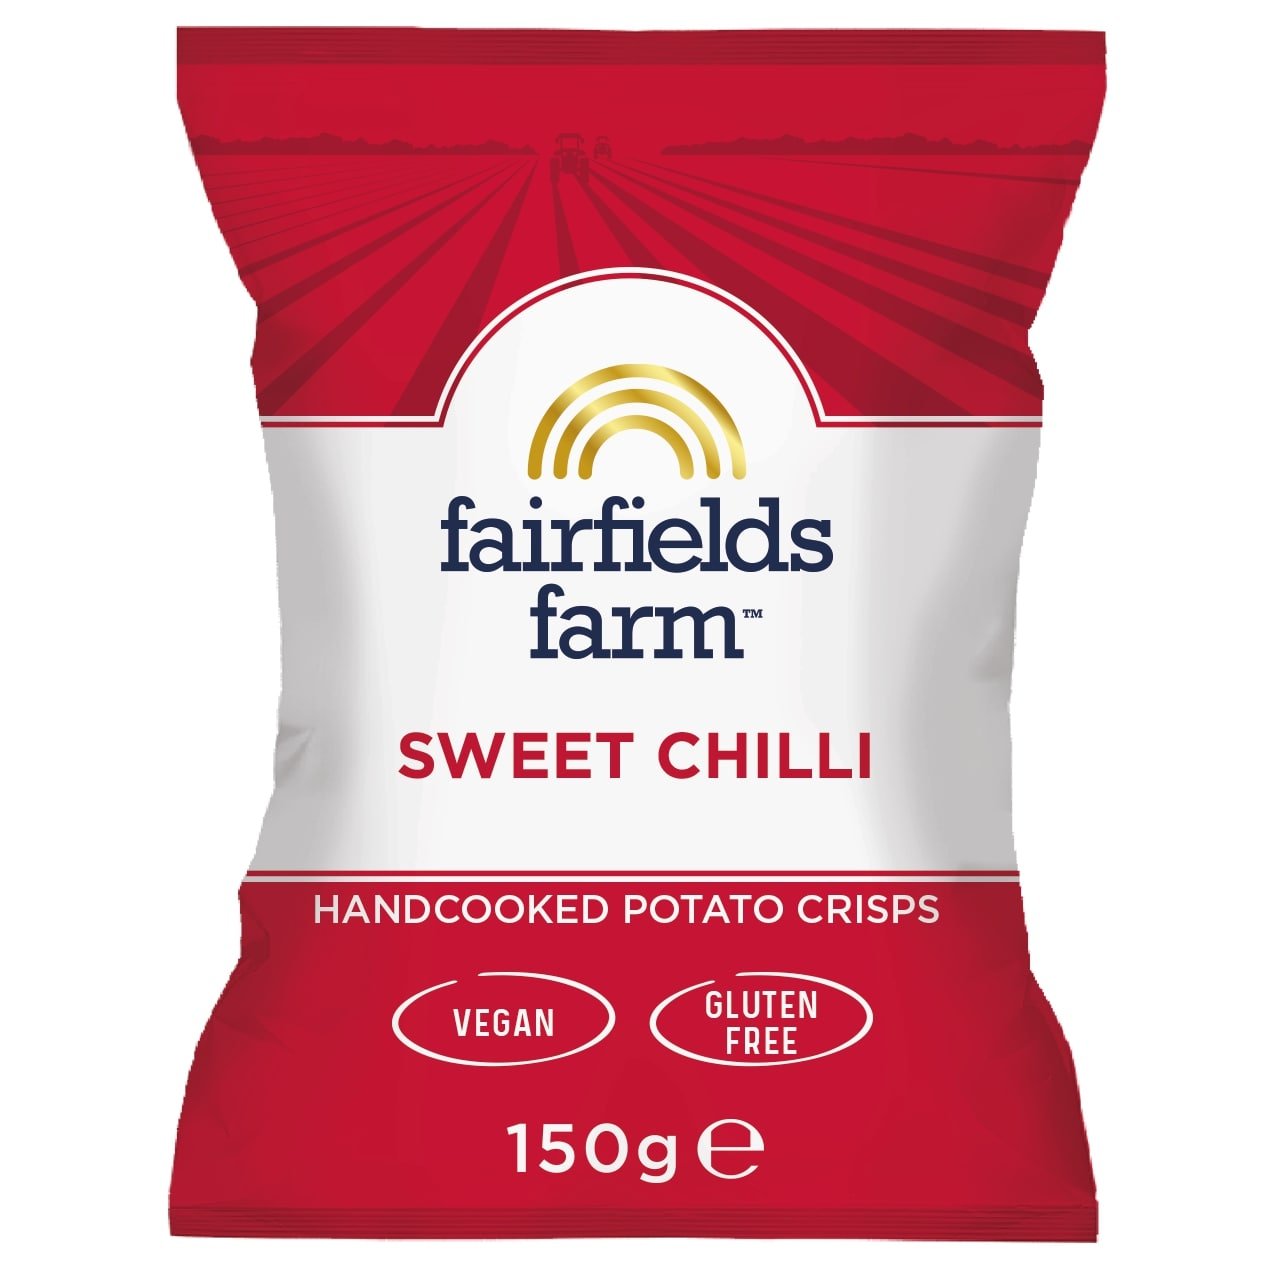 Sweet Chilli – 10 x 150g bags